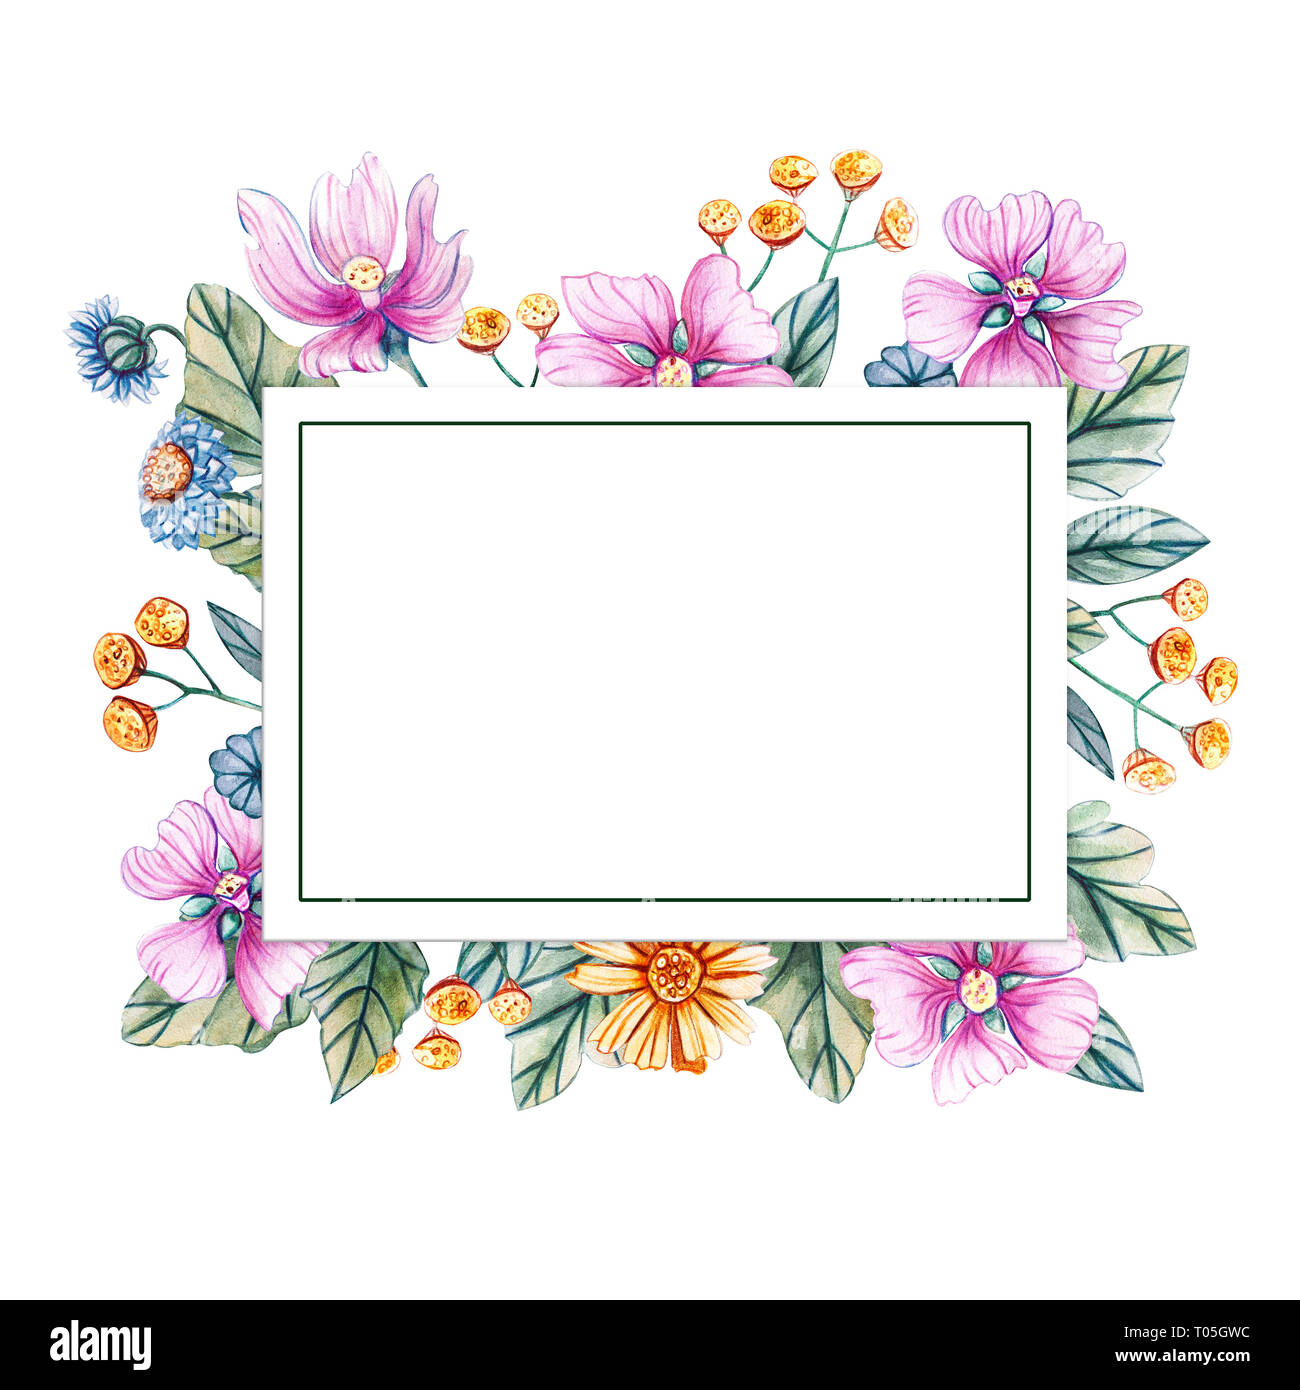 Floral square frame of watercolor wildflowers. There is a place for text. Flowers isolated on white background. Stock Photo